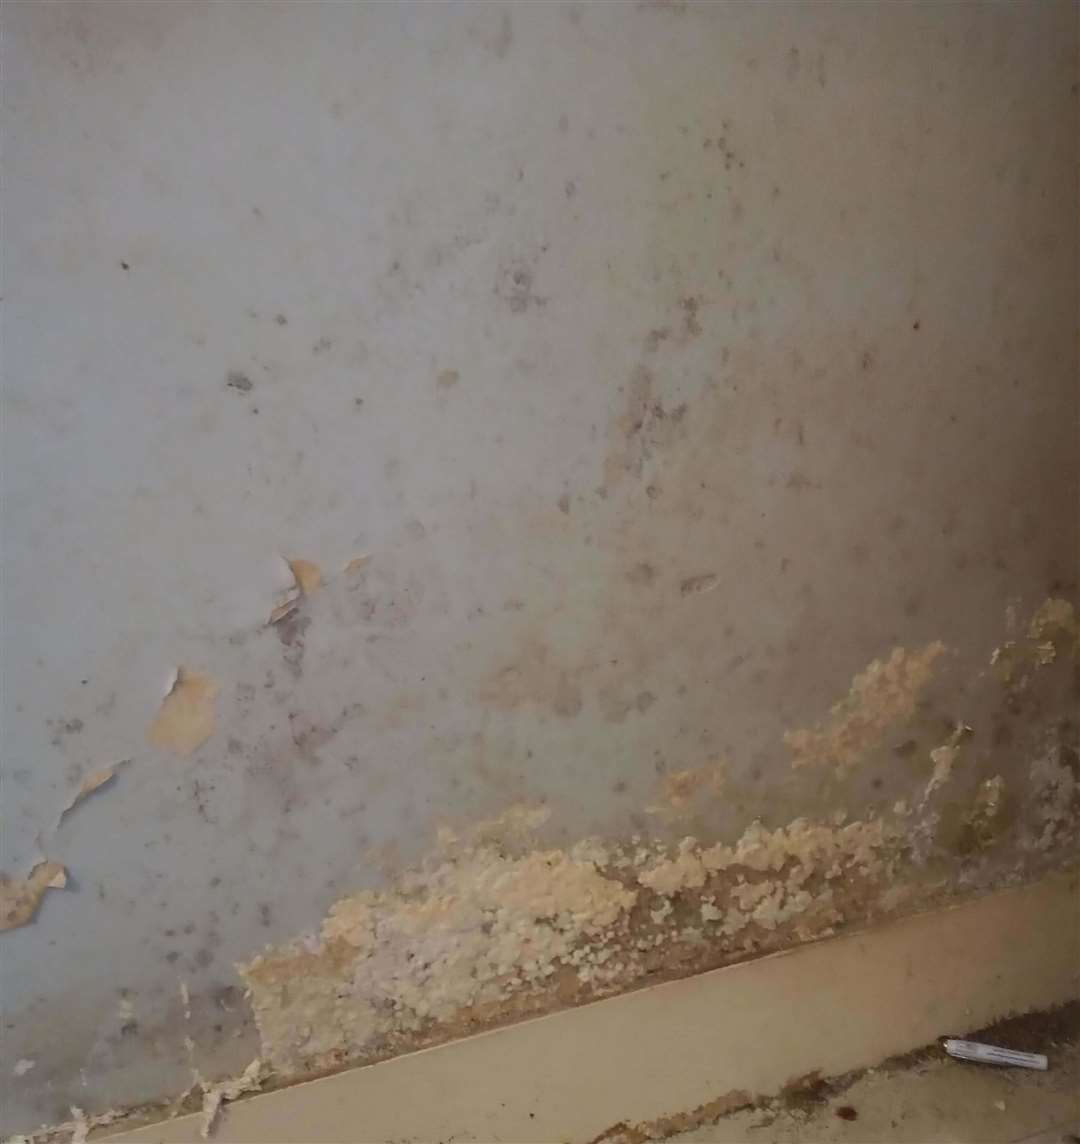 The mould and fungal growth on Stuart Bowie's bedroom wall.